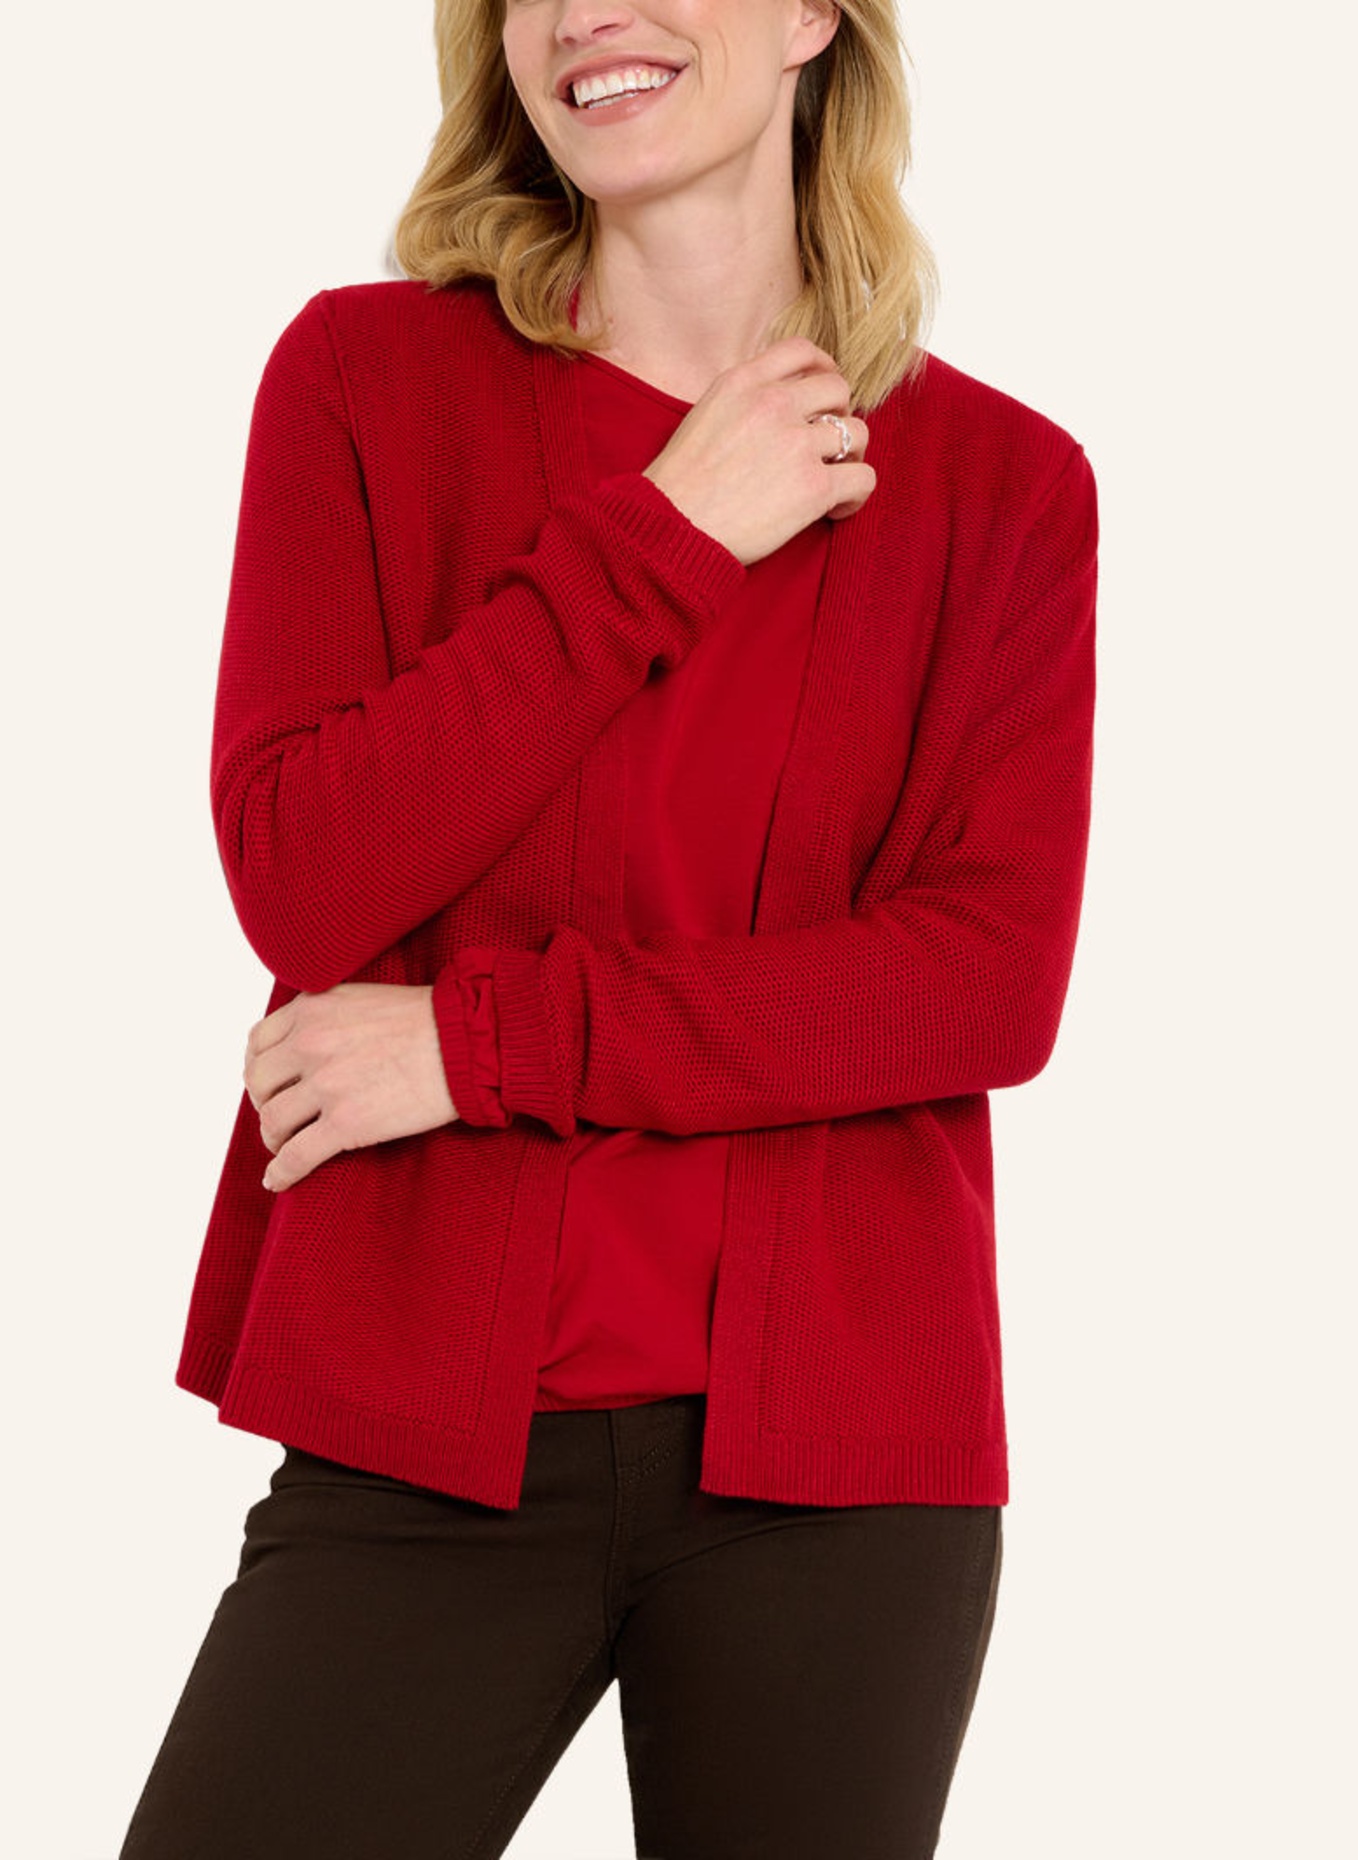 ANIQUE in STYLE BRAX Strickjacke rot